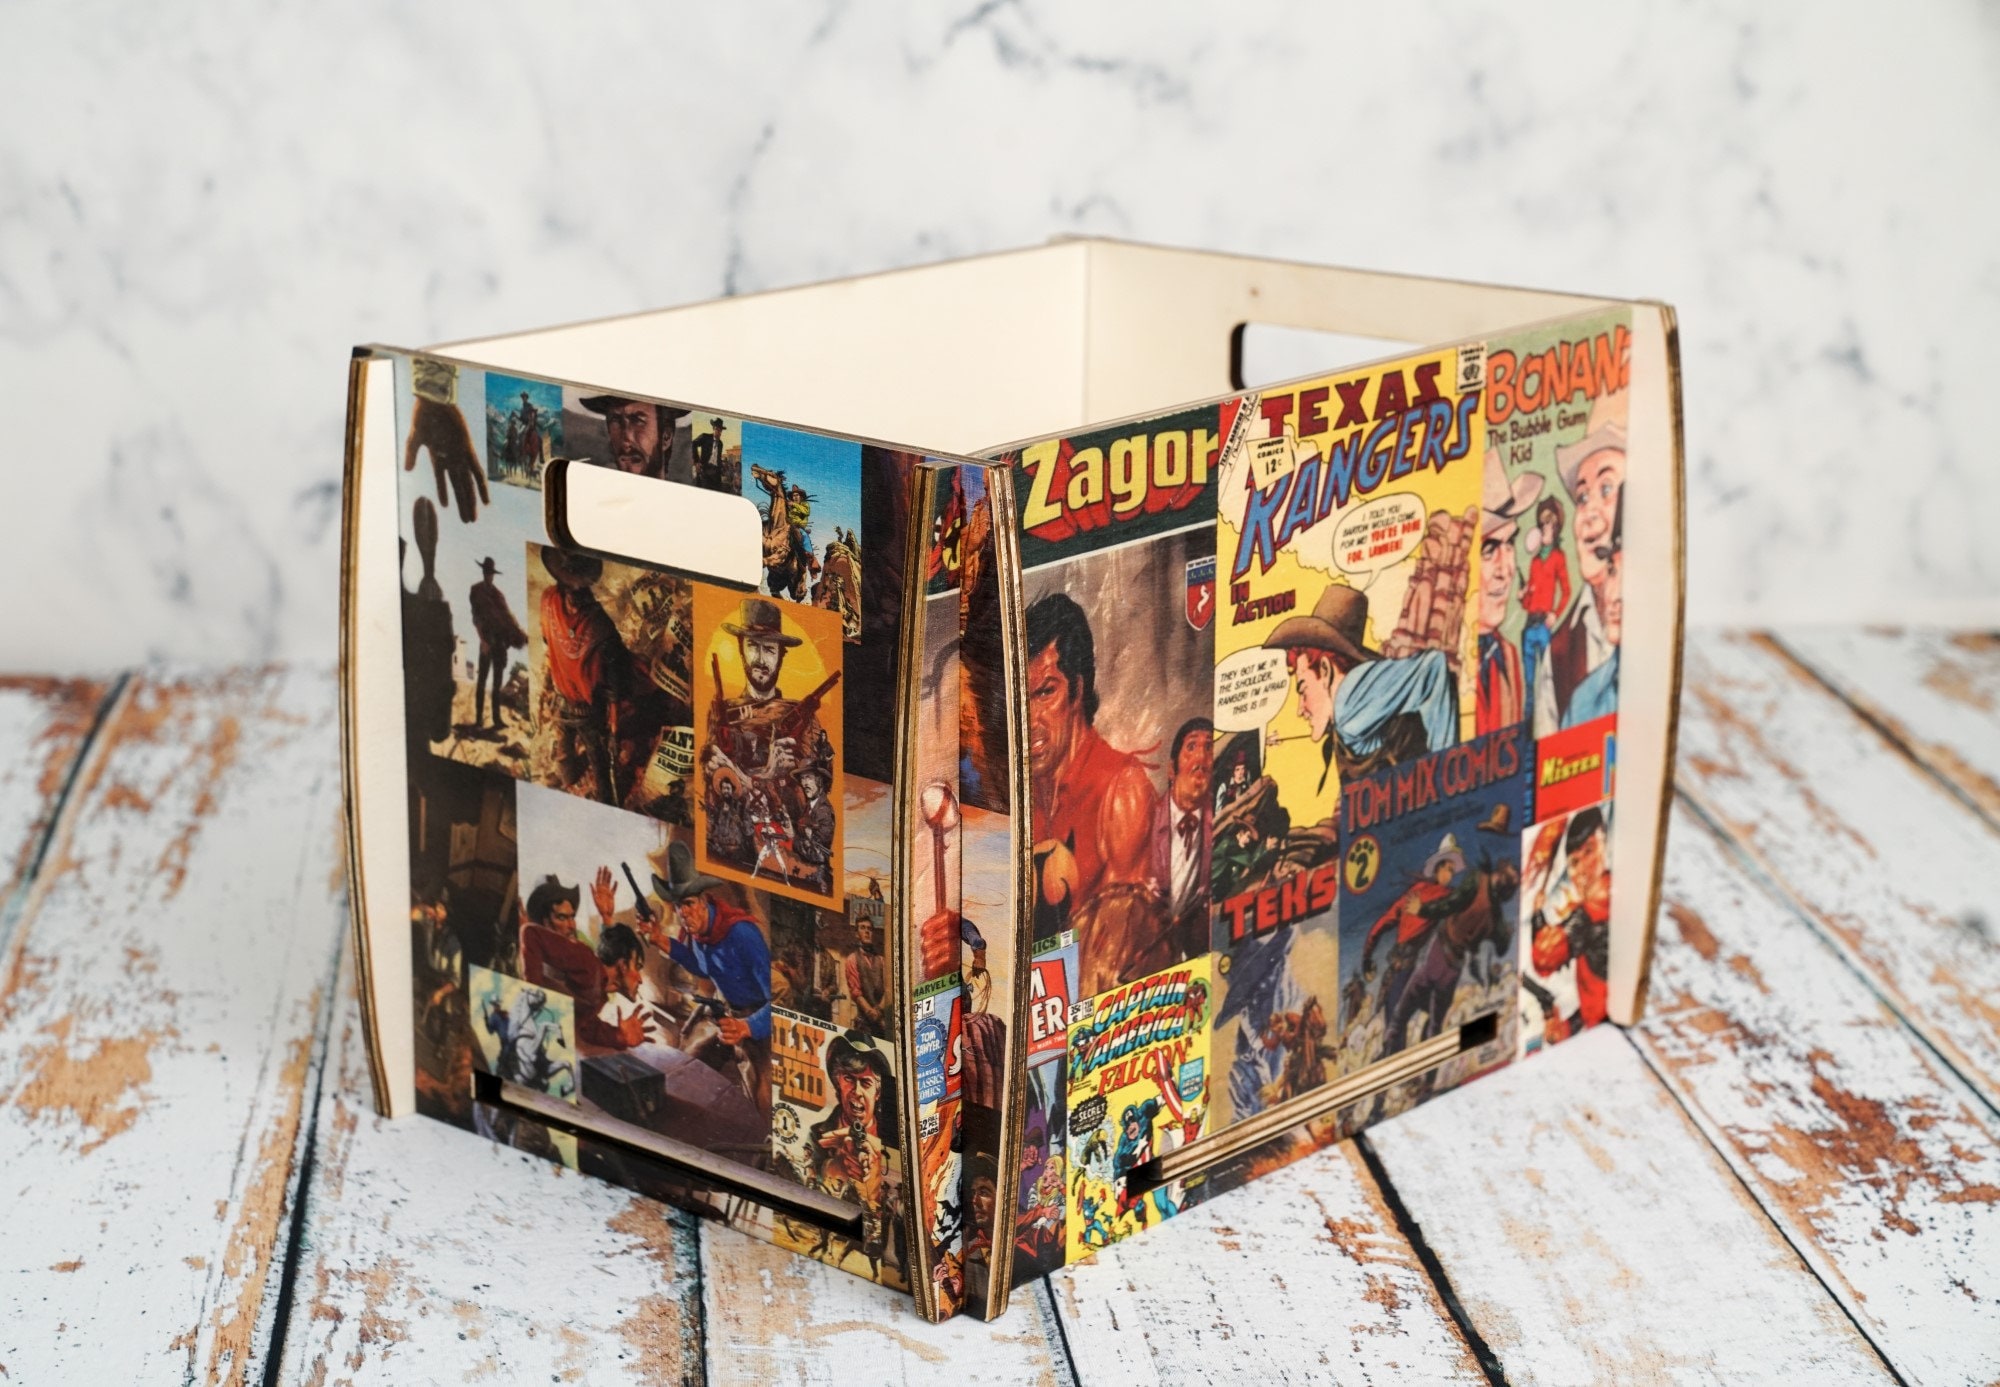 Comic Bags and Boards Clear Sleeves and Backing Boards for British Comic  Book Issues 